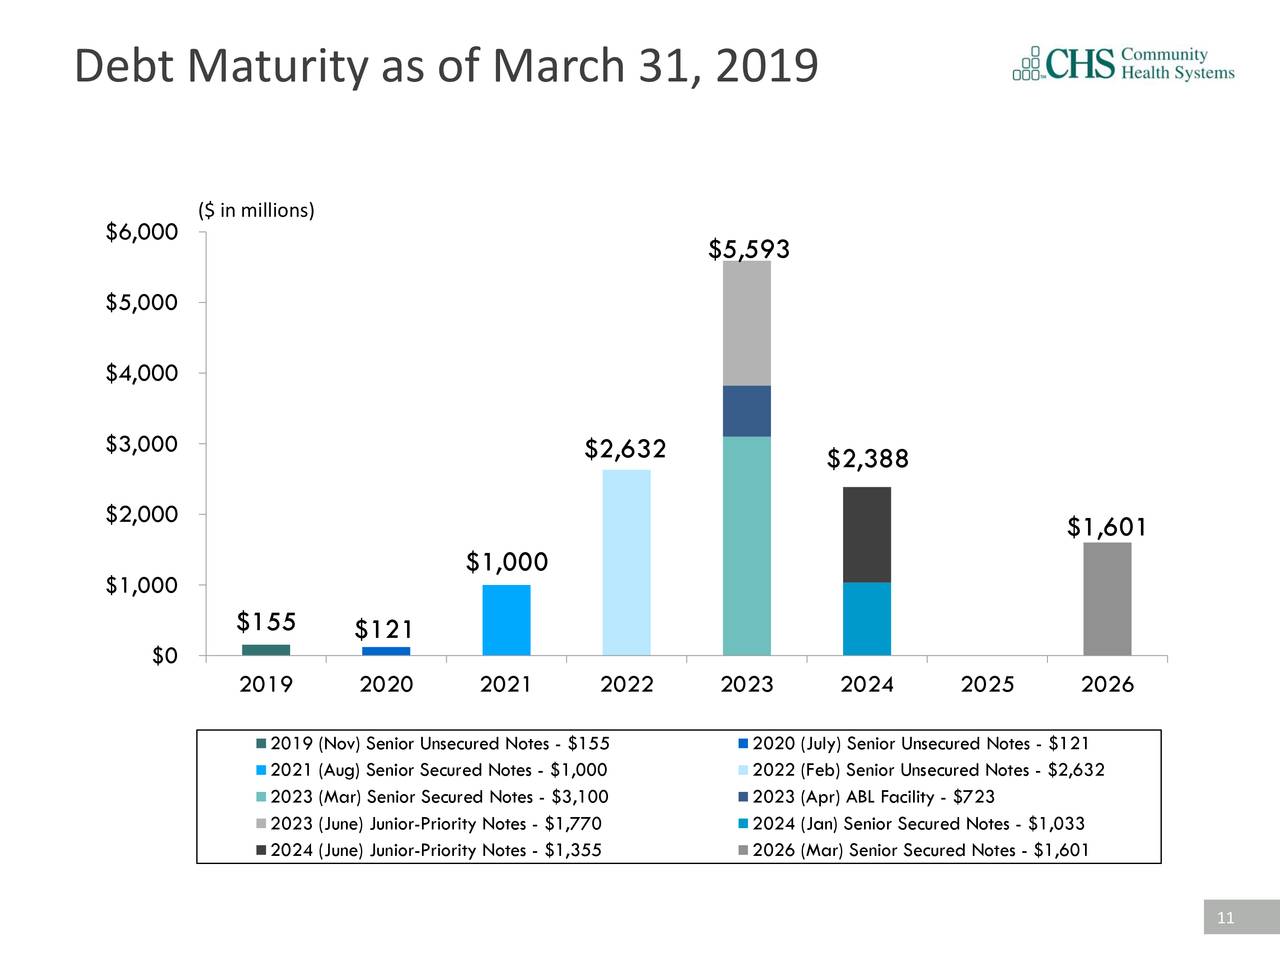 Debt Maturity as of March 31, 2019